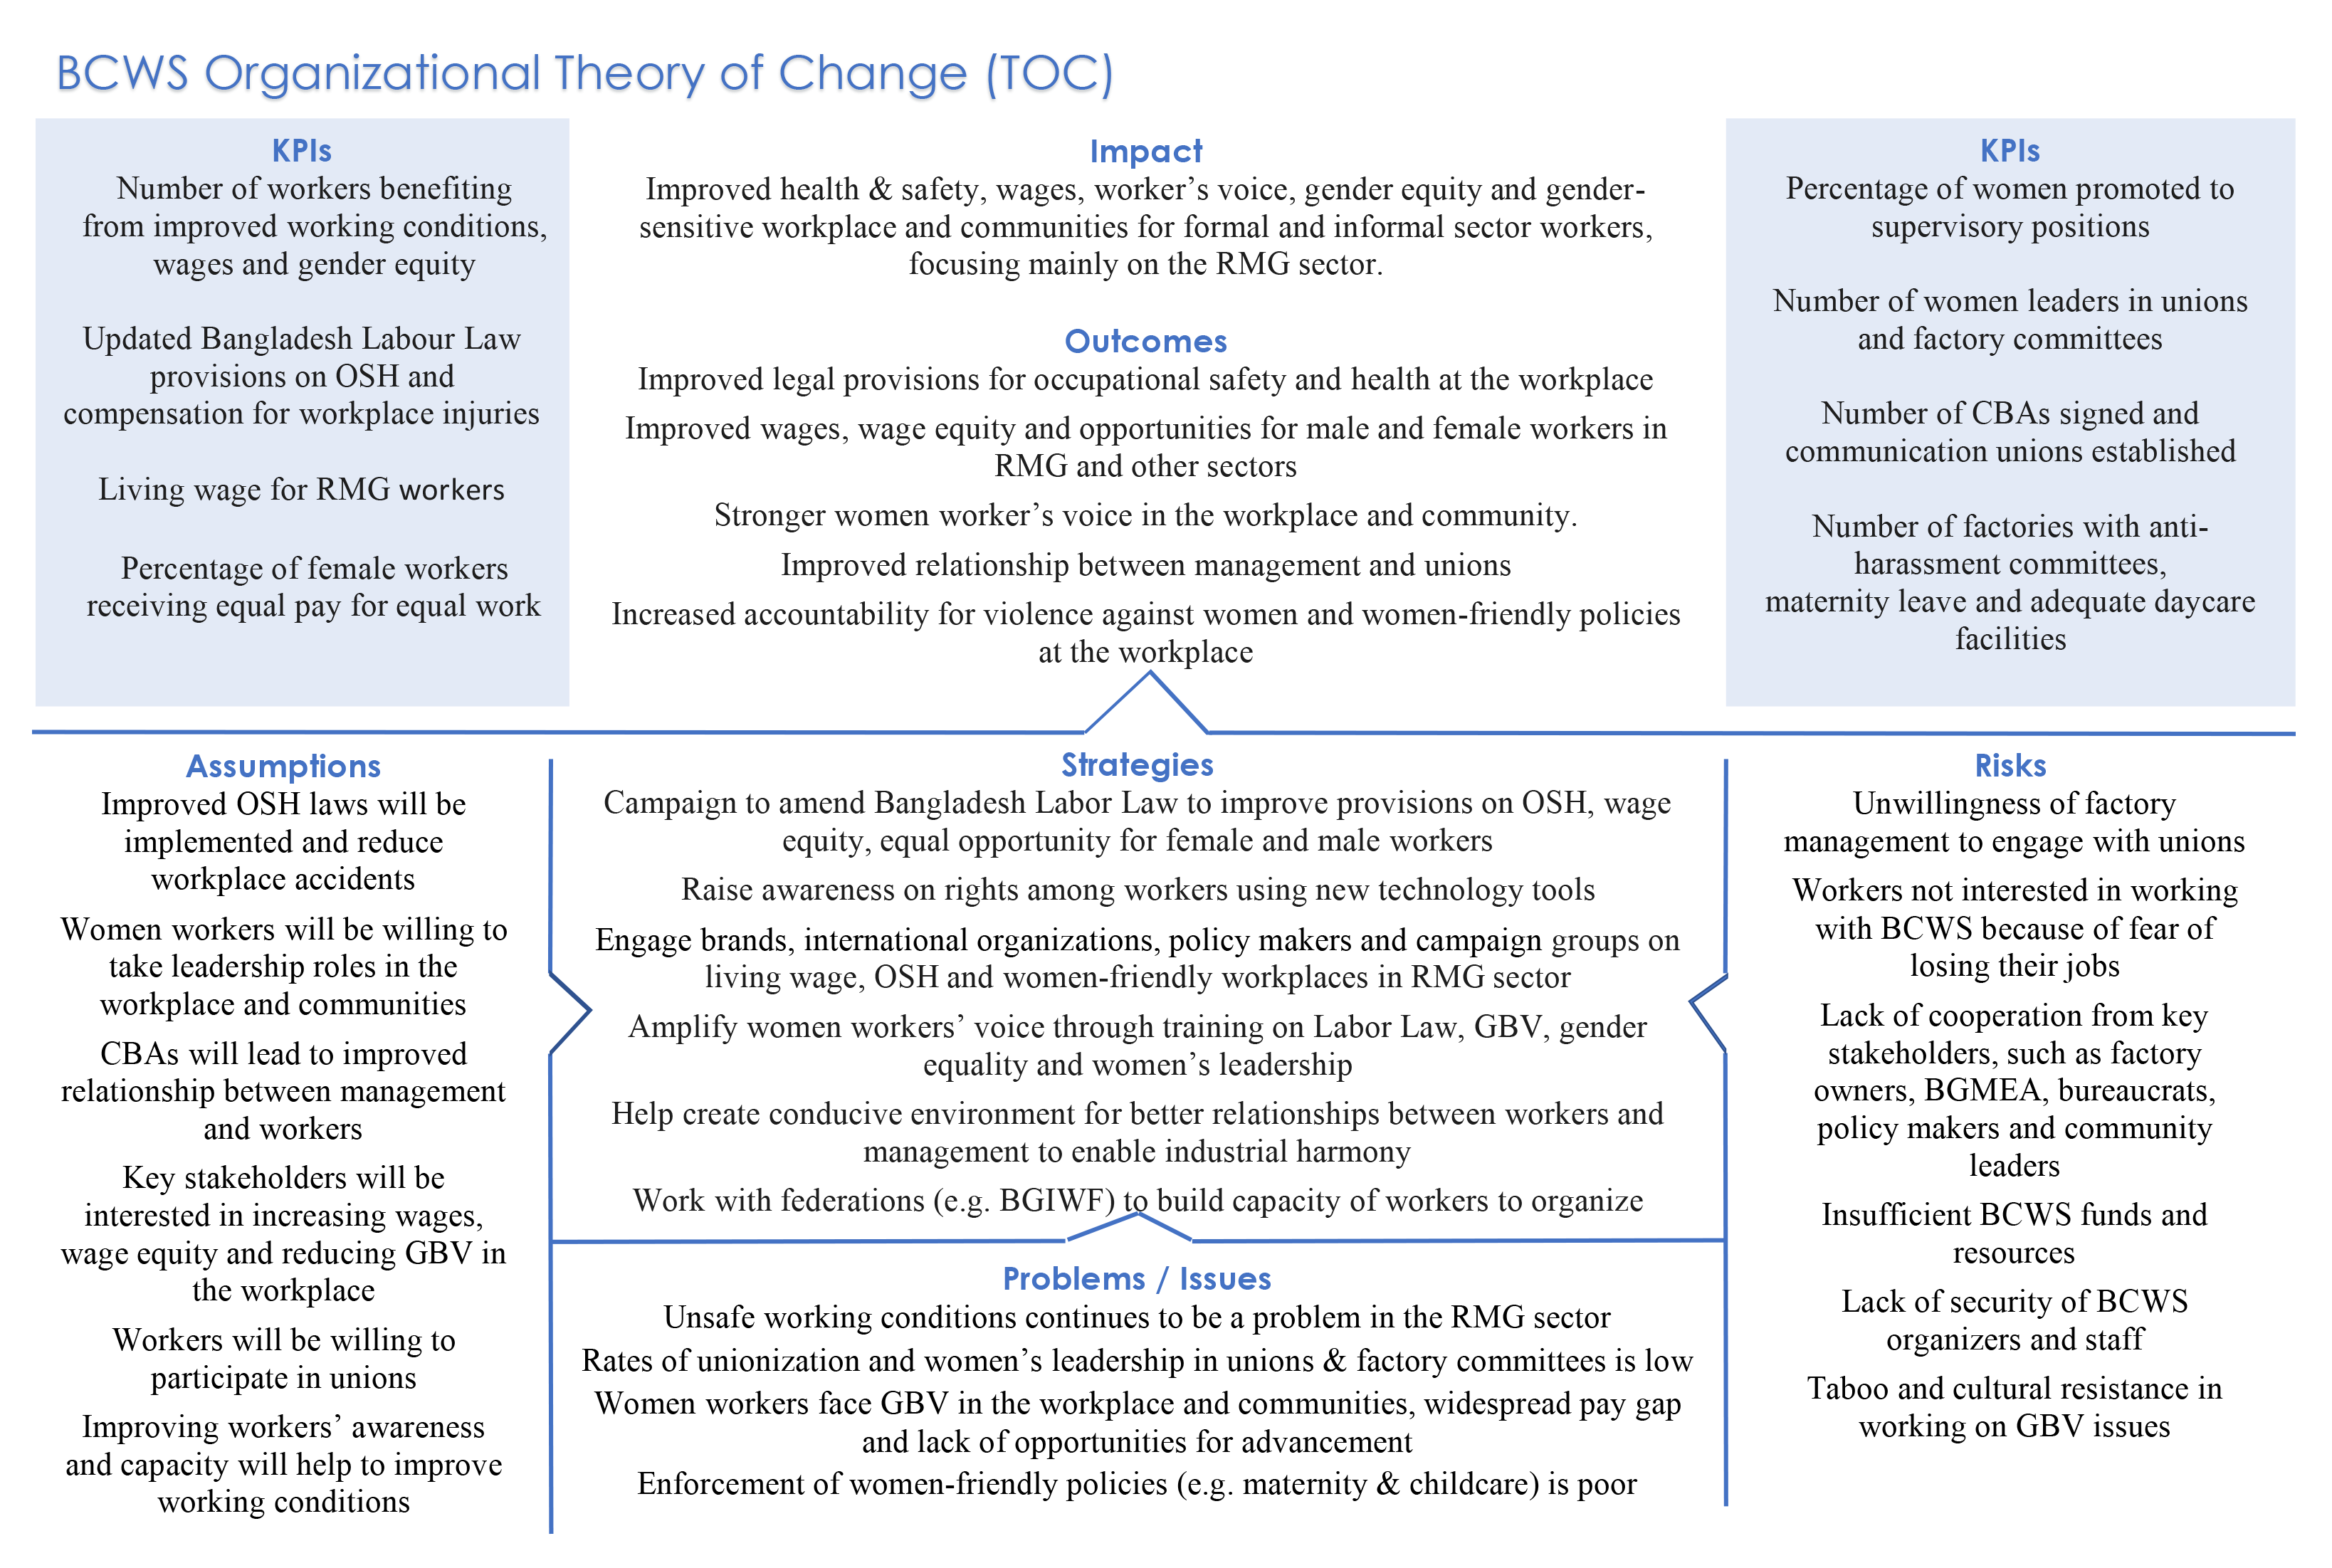 BCWS-Theory of change